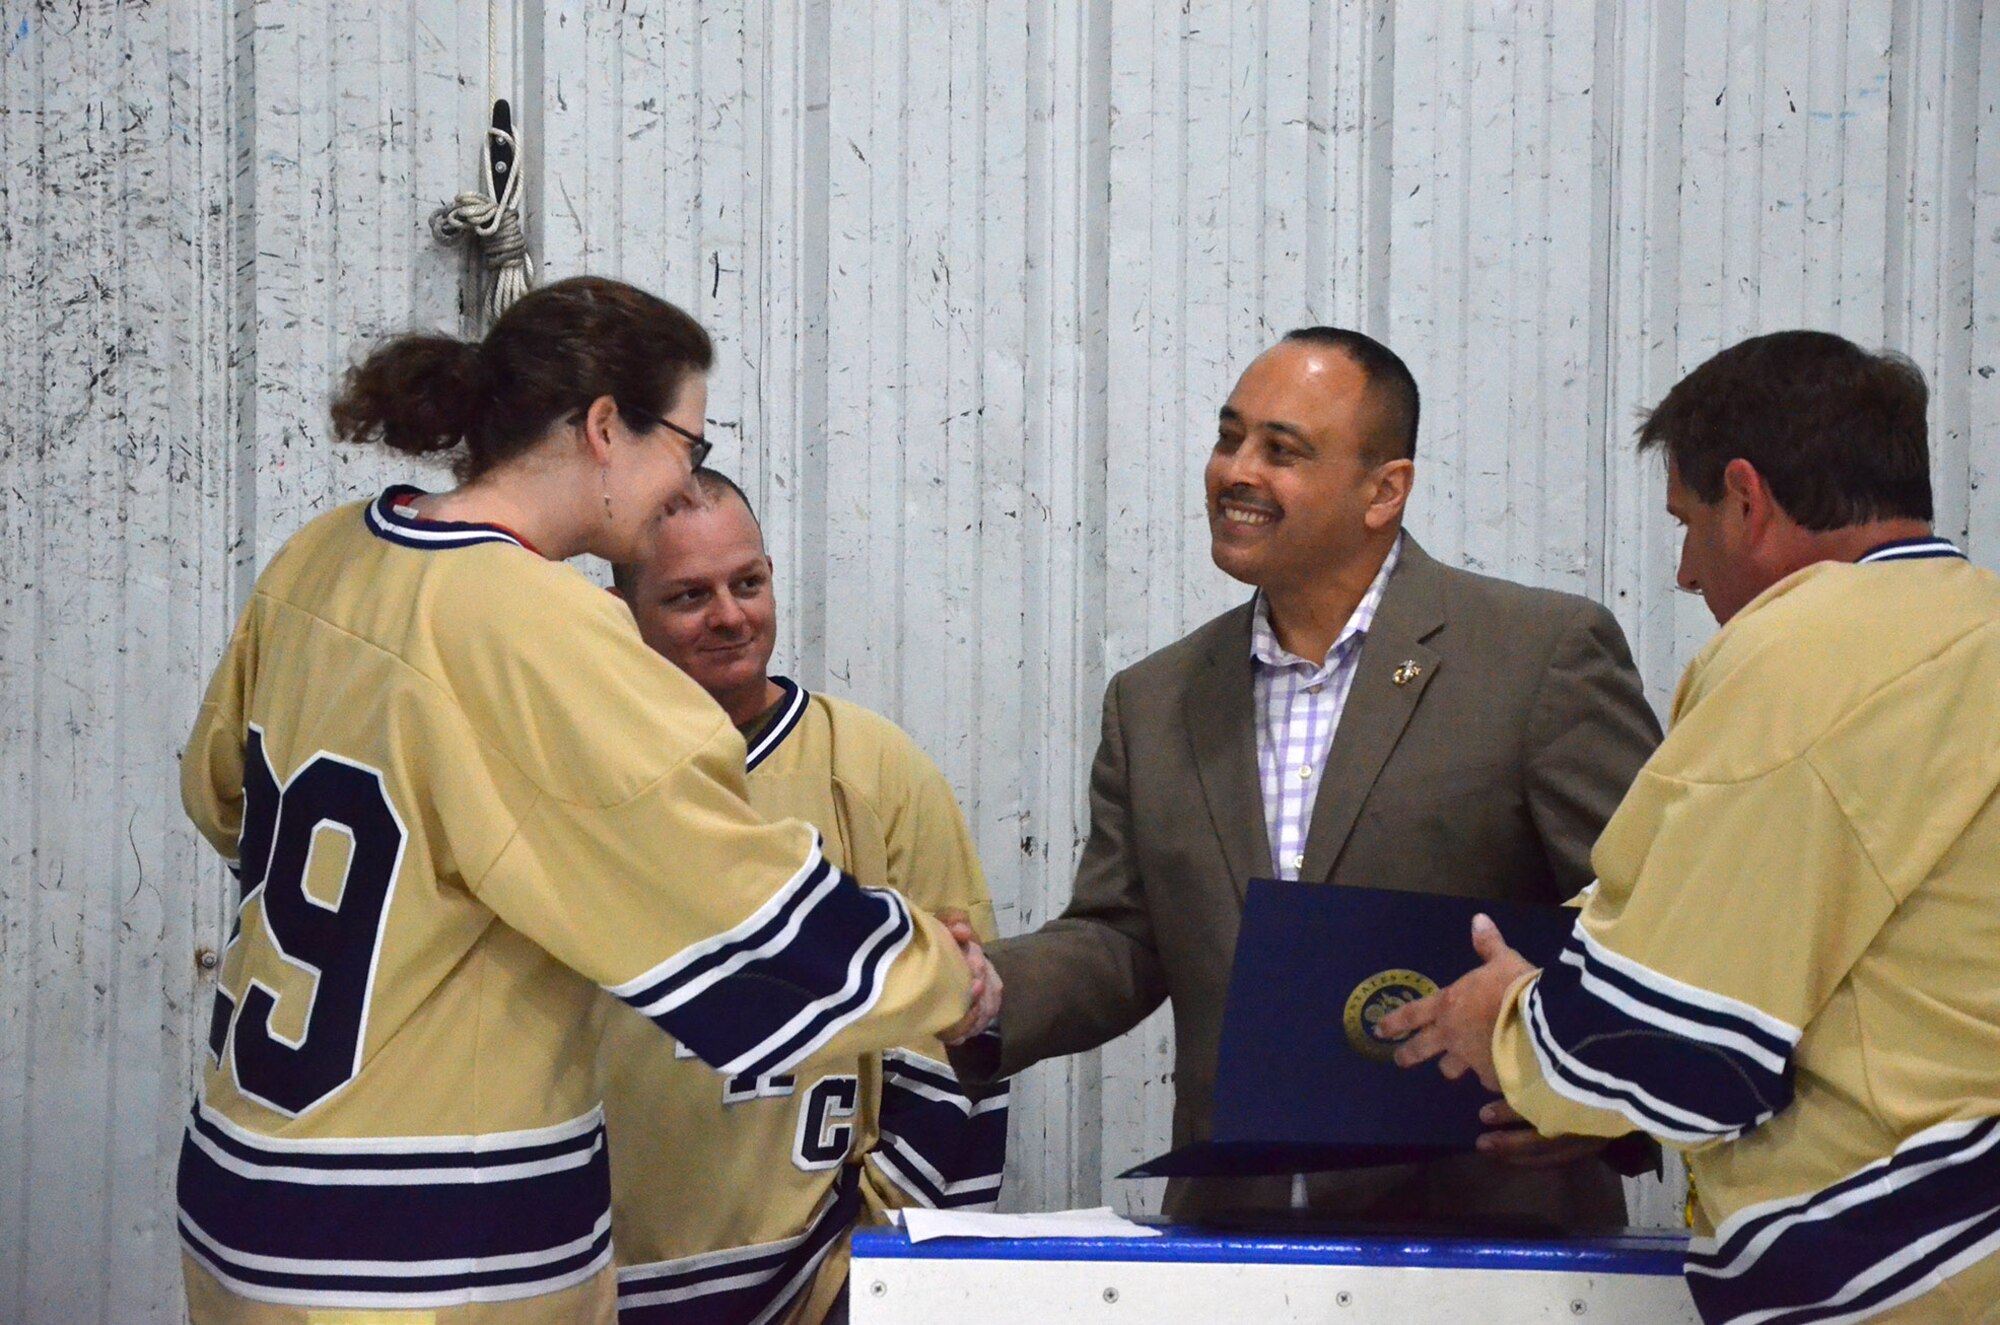 Master Sgt. Rebecca Goodwin, a member of the Athletes for Teamwork and Charity hockey team at Patrick AFB, Fla., shakes the hand of Rob Medina, Director of Community Relations for Congressman Bill Posey (FL-15), where Media presented Certificates of Appreciation to the players for their fundraising efforts.  Also pictured are Tech. Sgt. Denton Kimber (second from left) and team captain Bill Hungate (right).  (U.S. Air Force photo by Susan A. Romano)